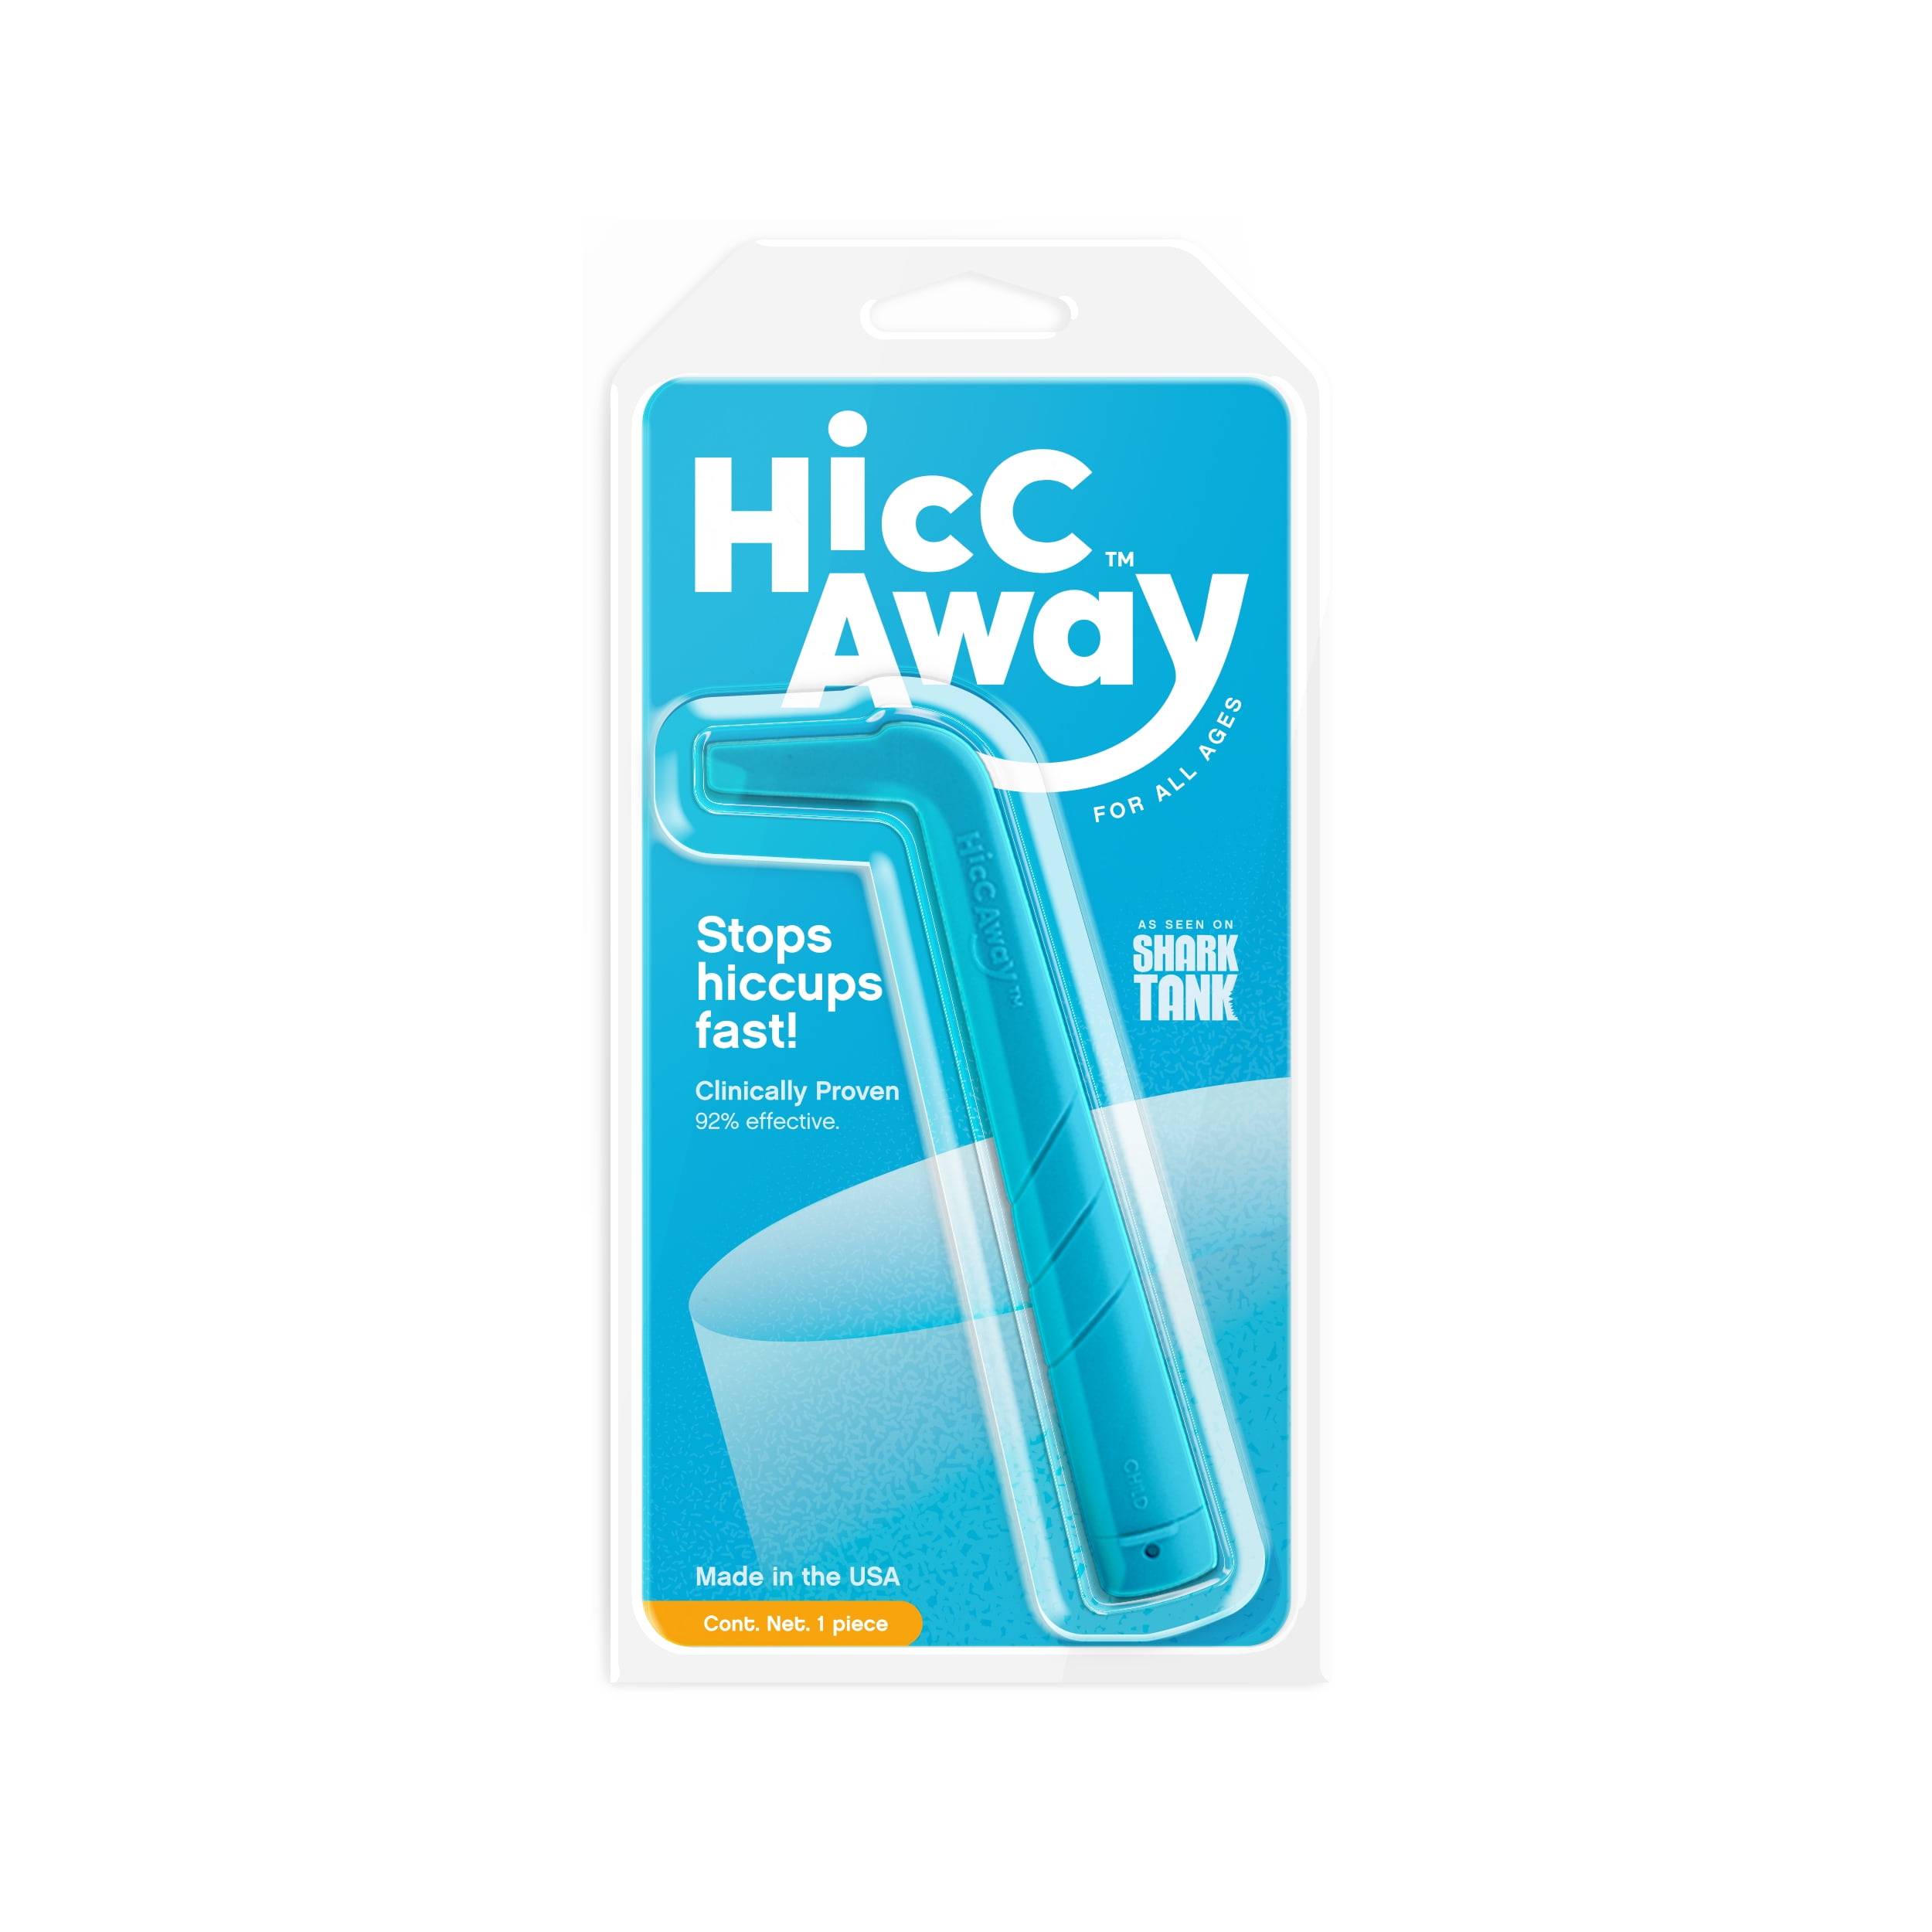 Buy HiccAway with Case by HiccAway on OpenSky